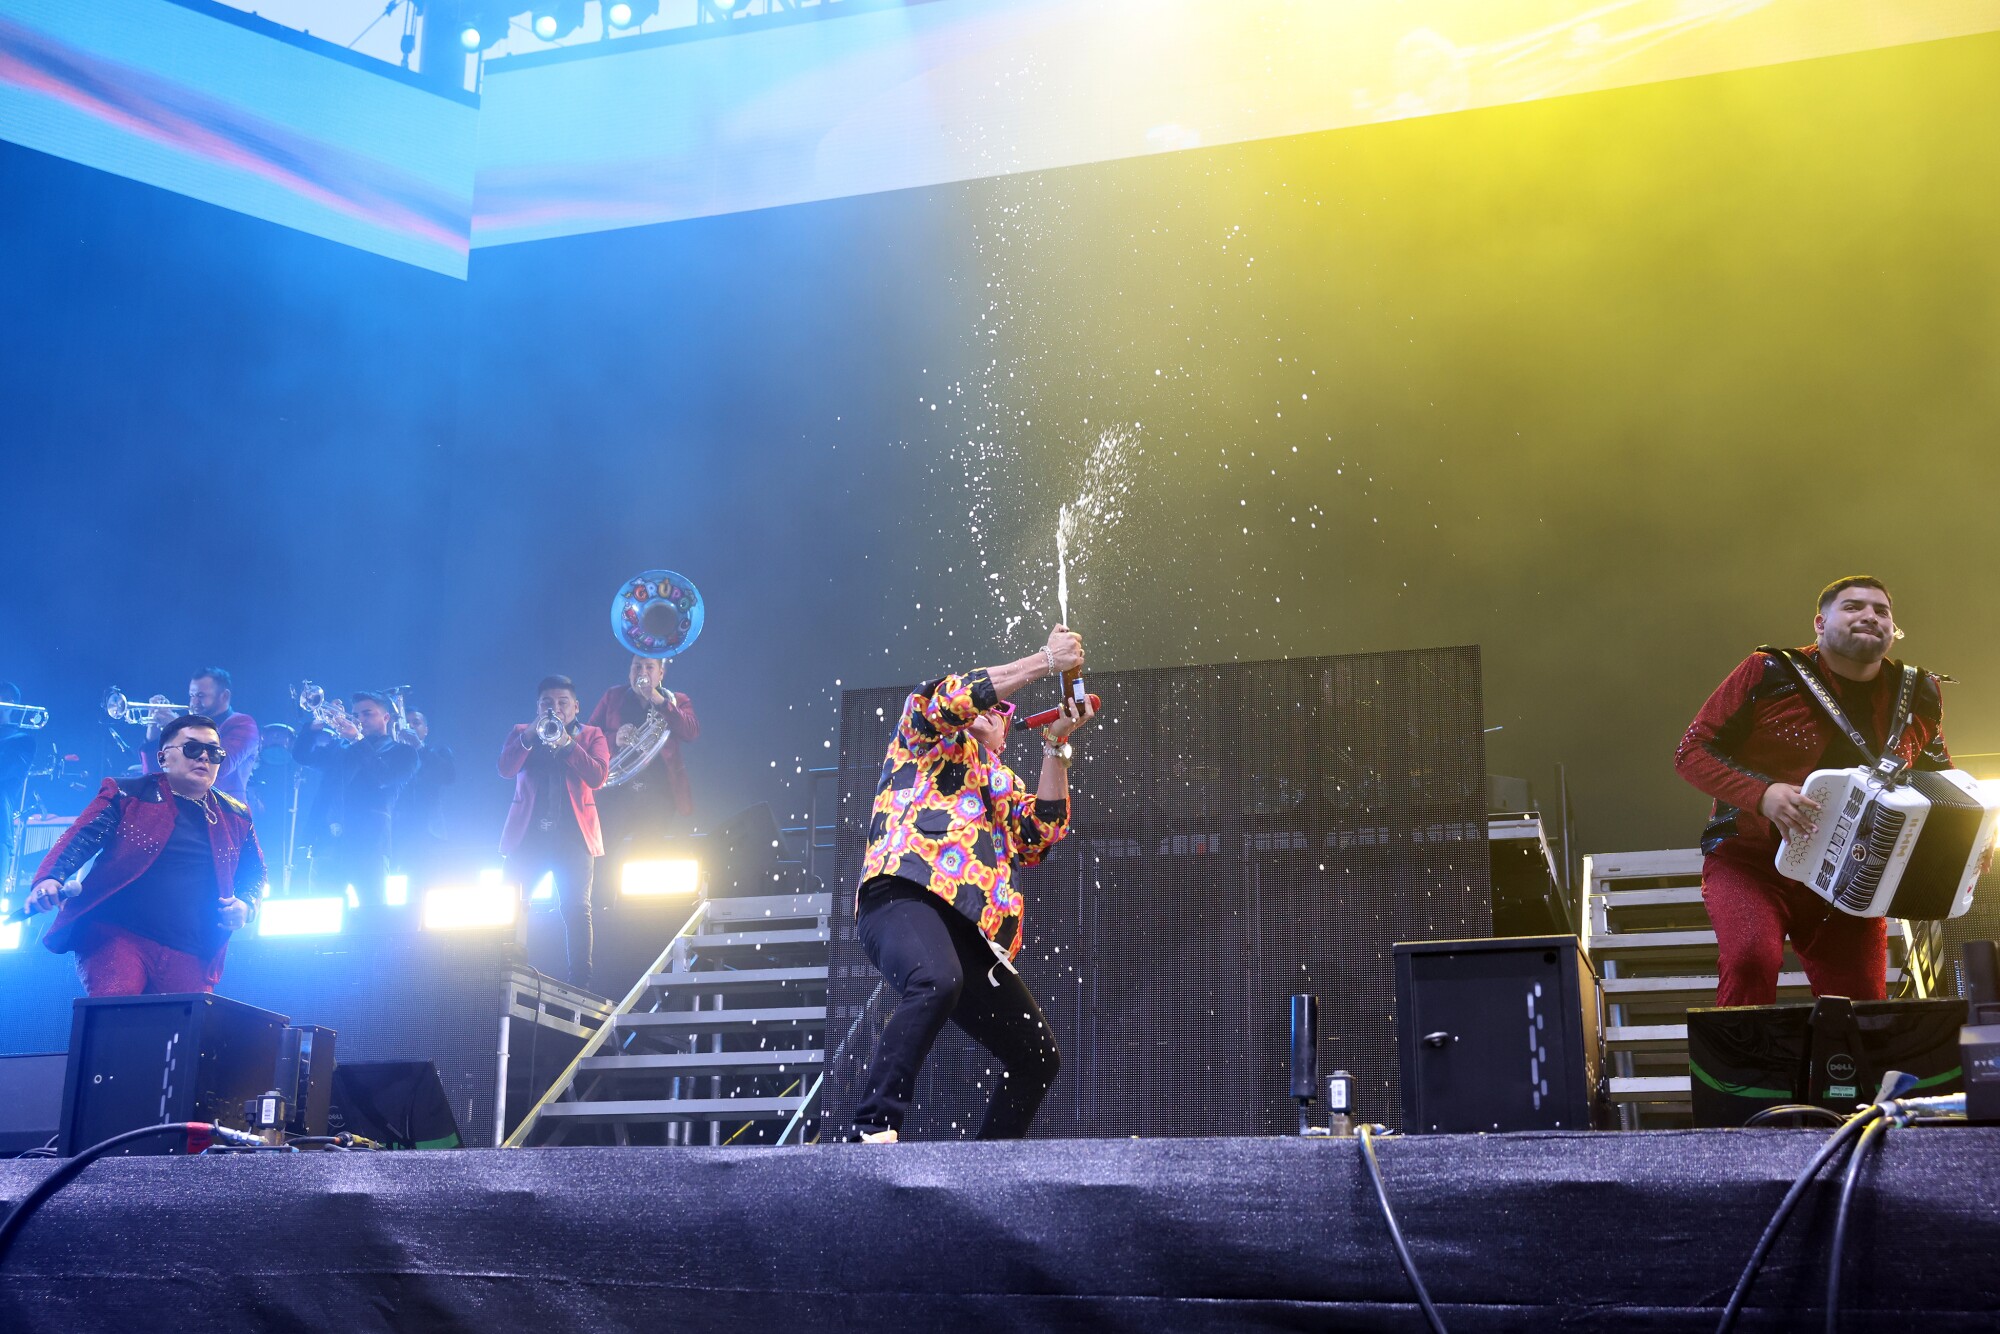 Grupo Firme sprays a drink in the air while performing at the Coachella festival.